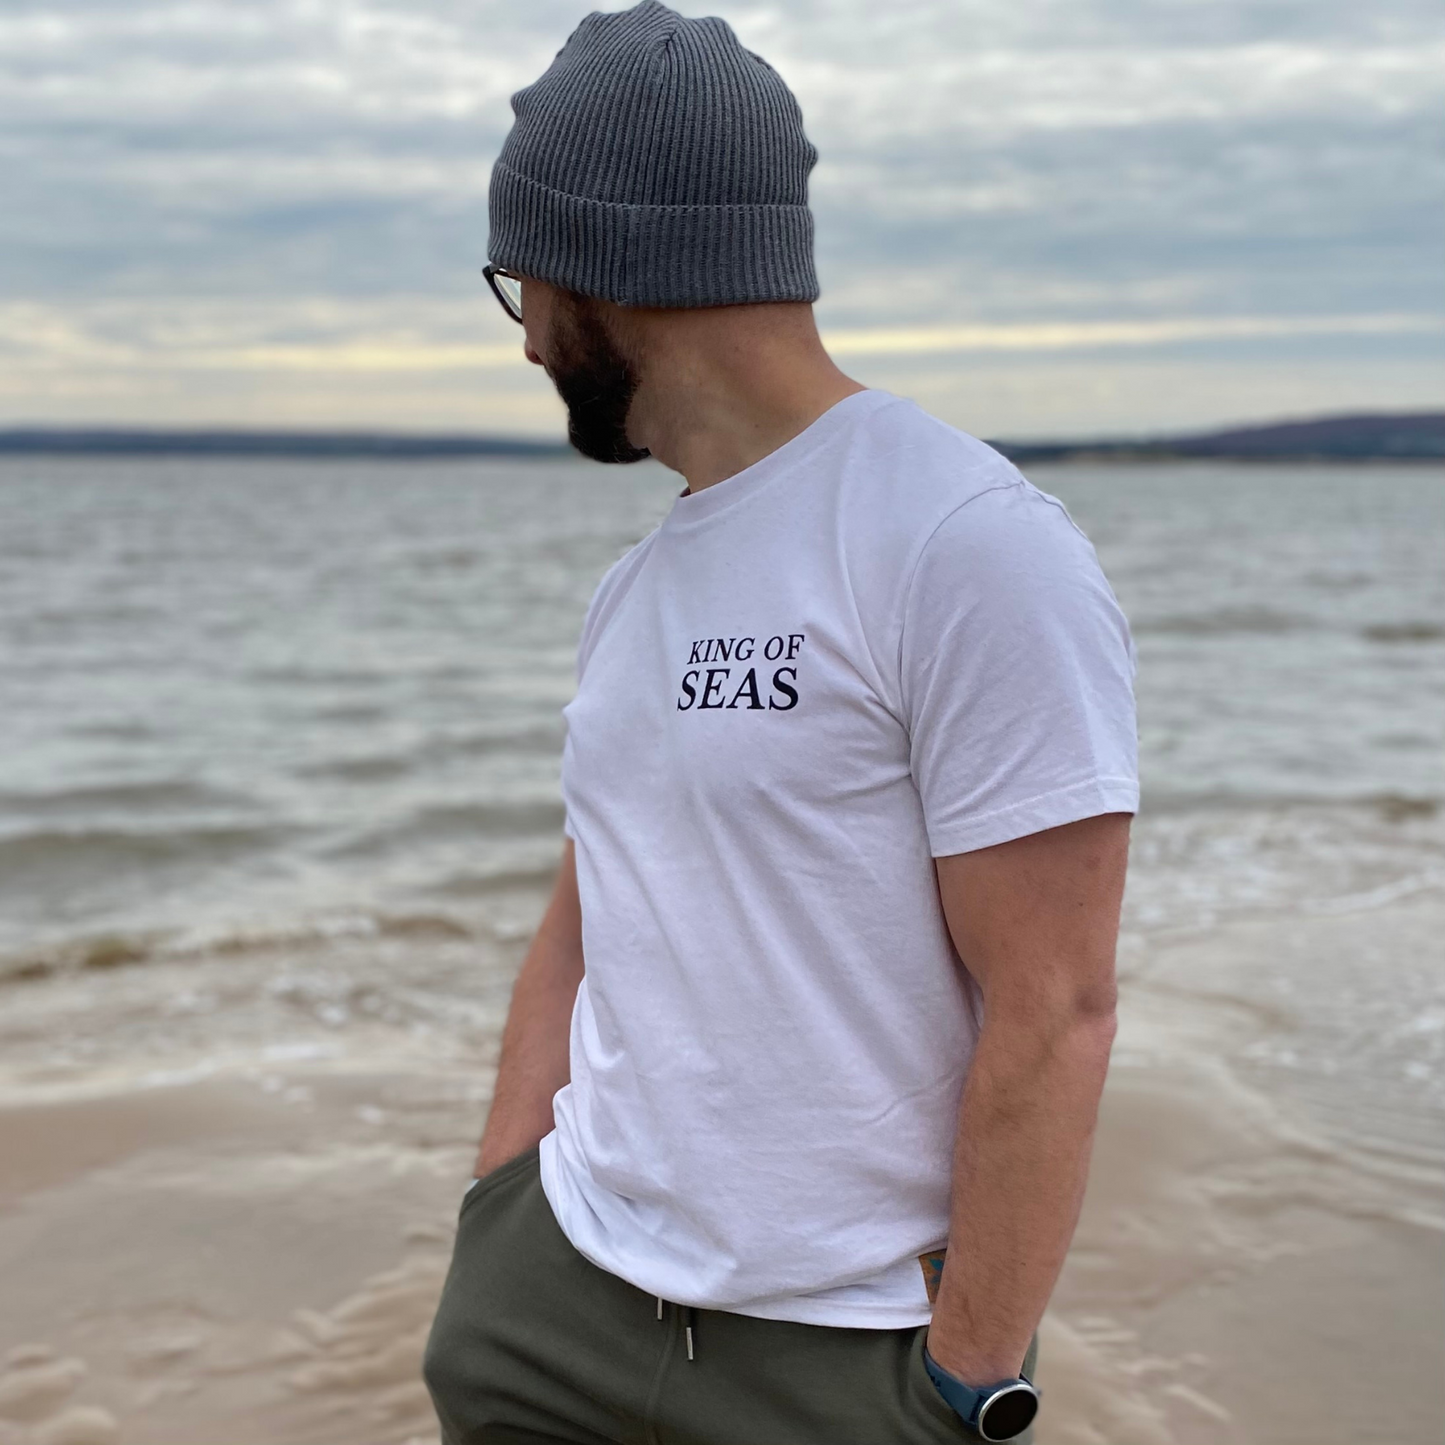 A man wearing a t-shirt with 'King Of Seas' printed on it and a grey beanie hat.